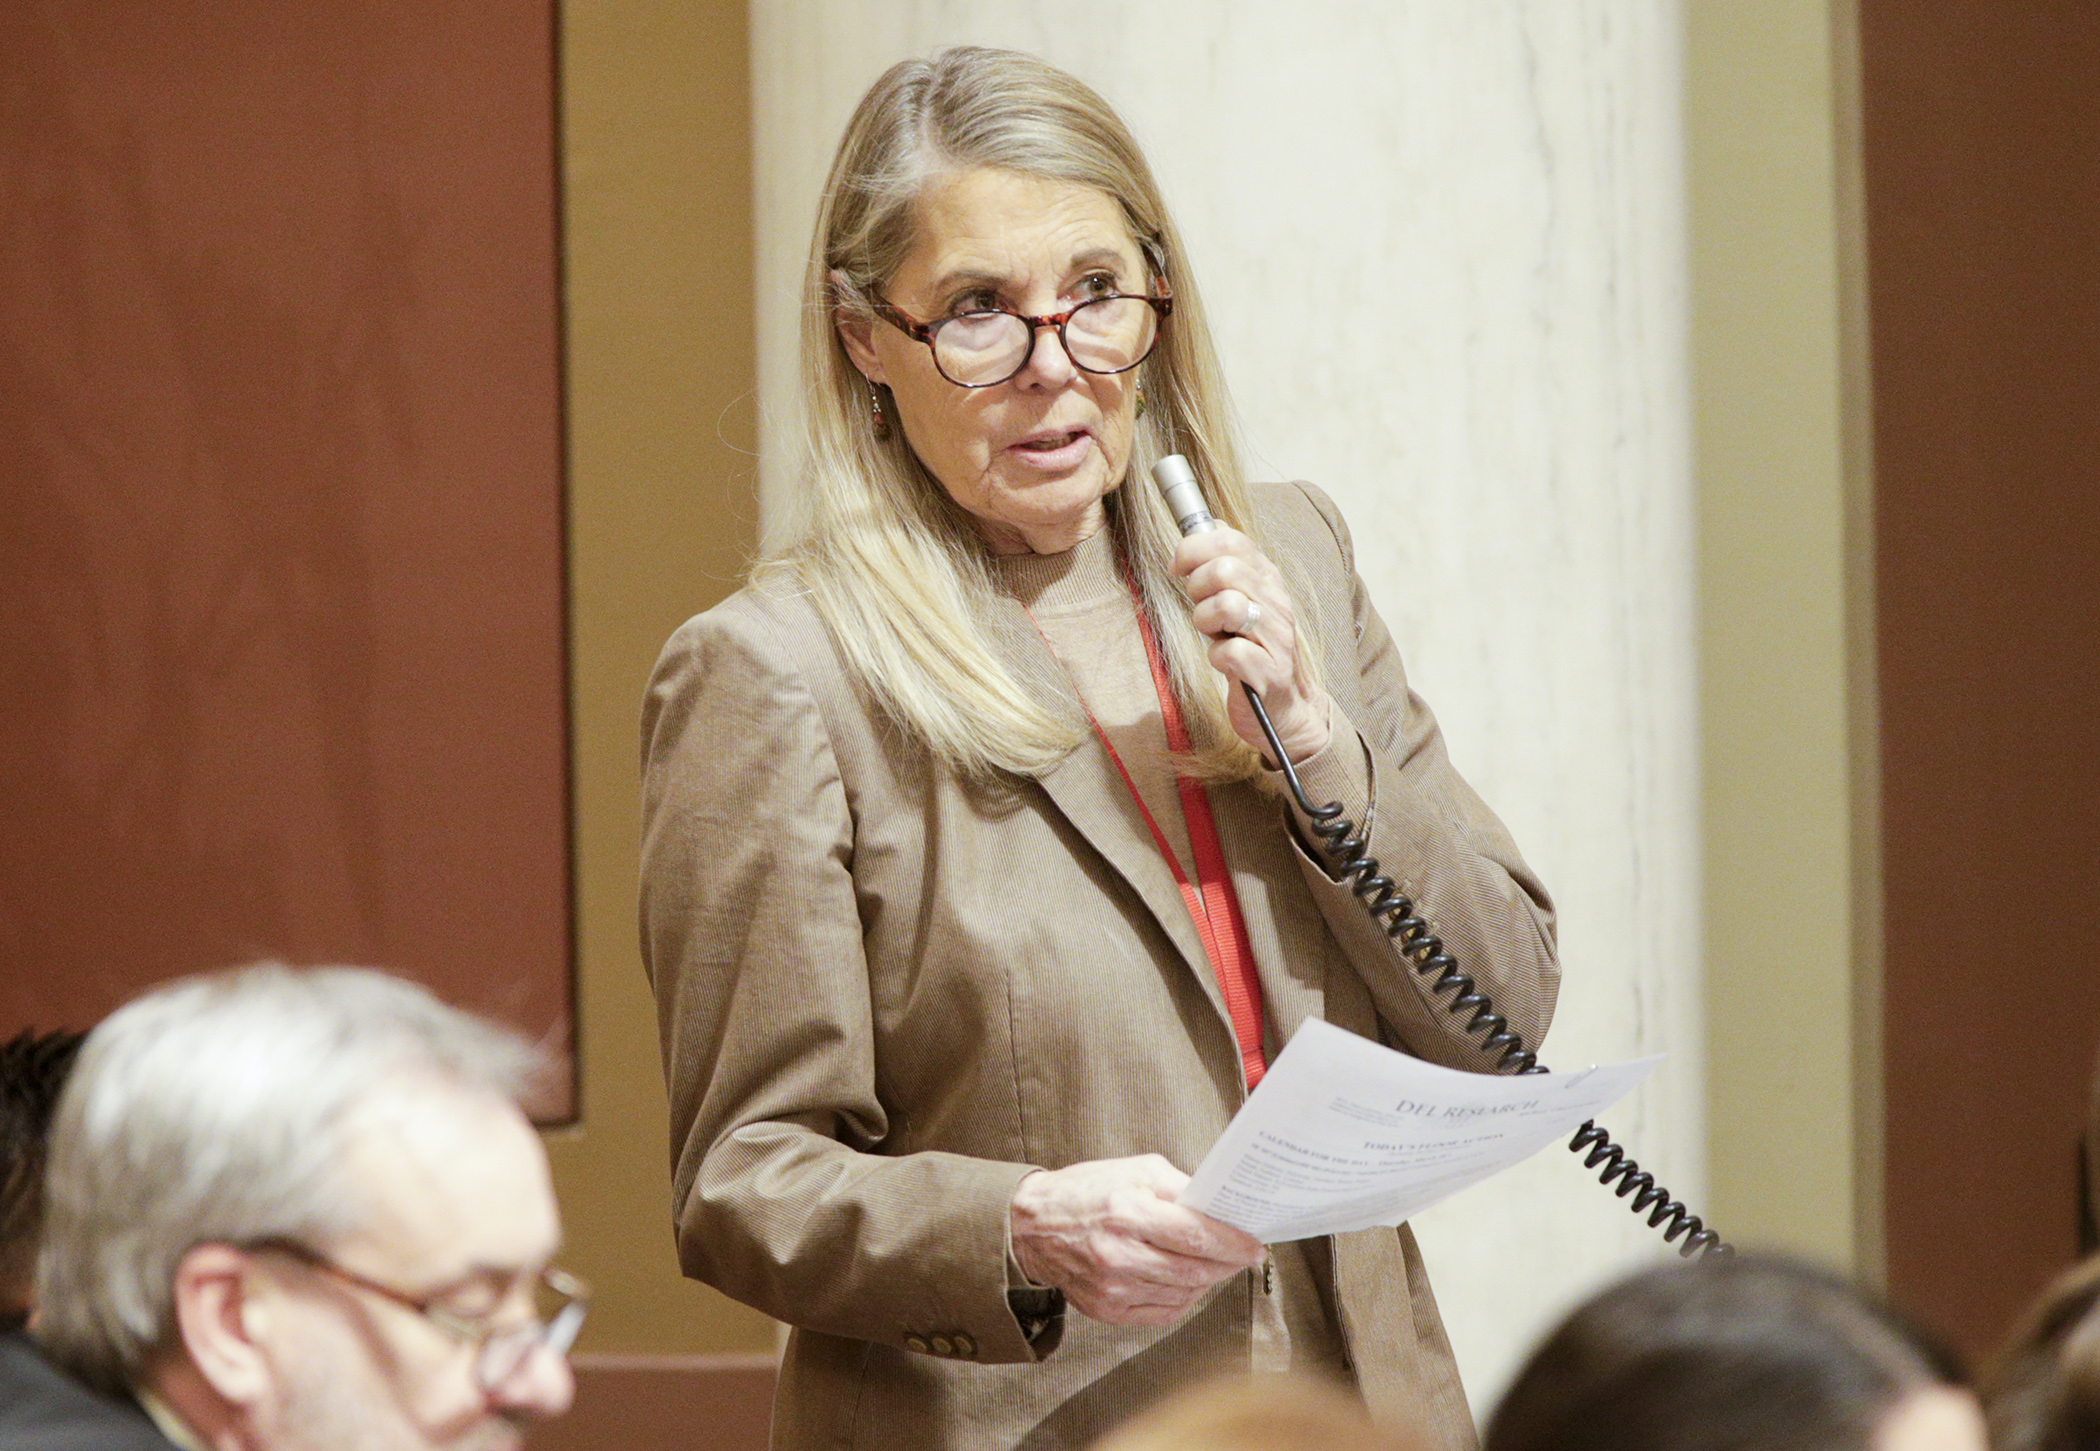 Rep. Shelly Christensen comments during floor debate on her motion to adopt the conference committee report on SF1743, the so-called ”Snow Day Relief Bill.” Photo by Paul Battaglia